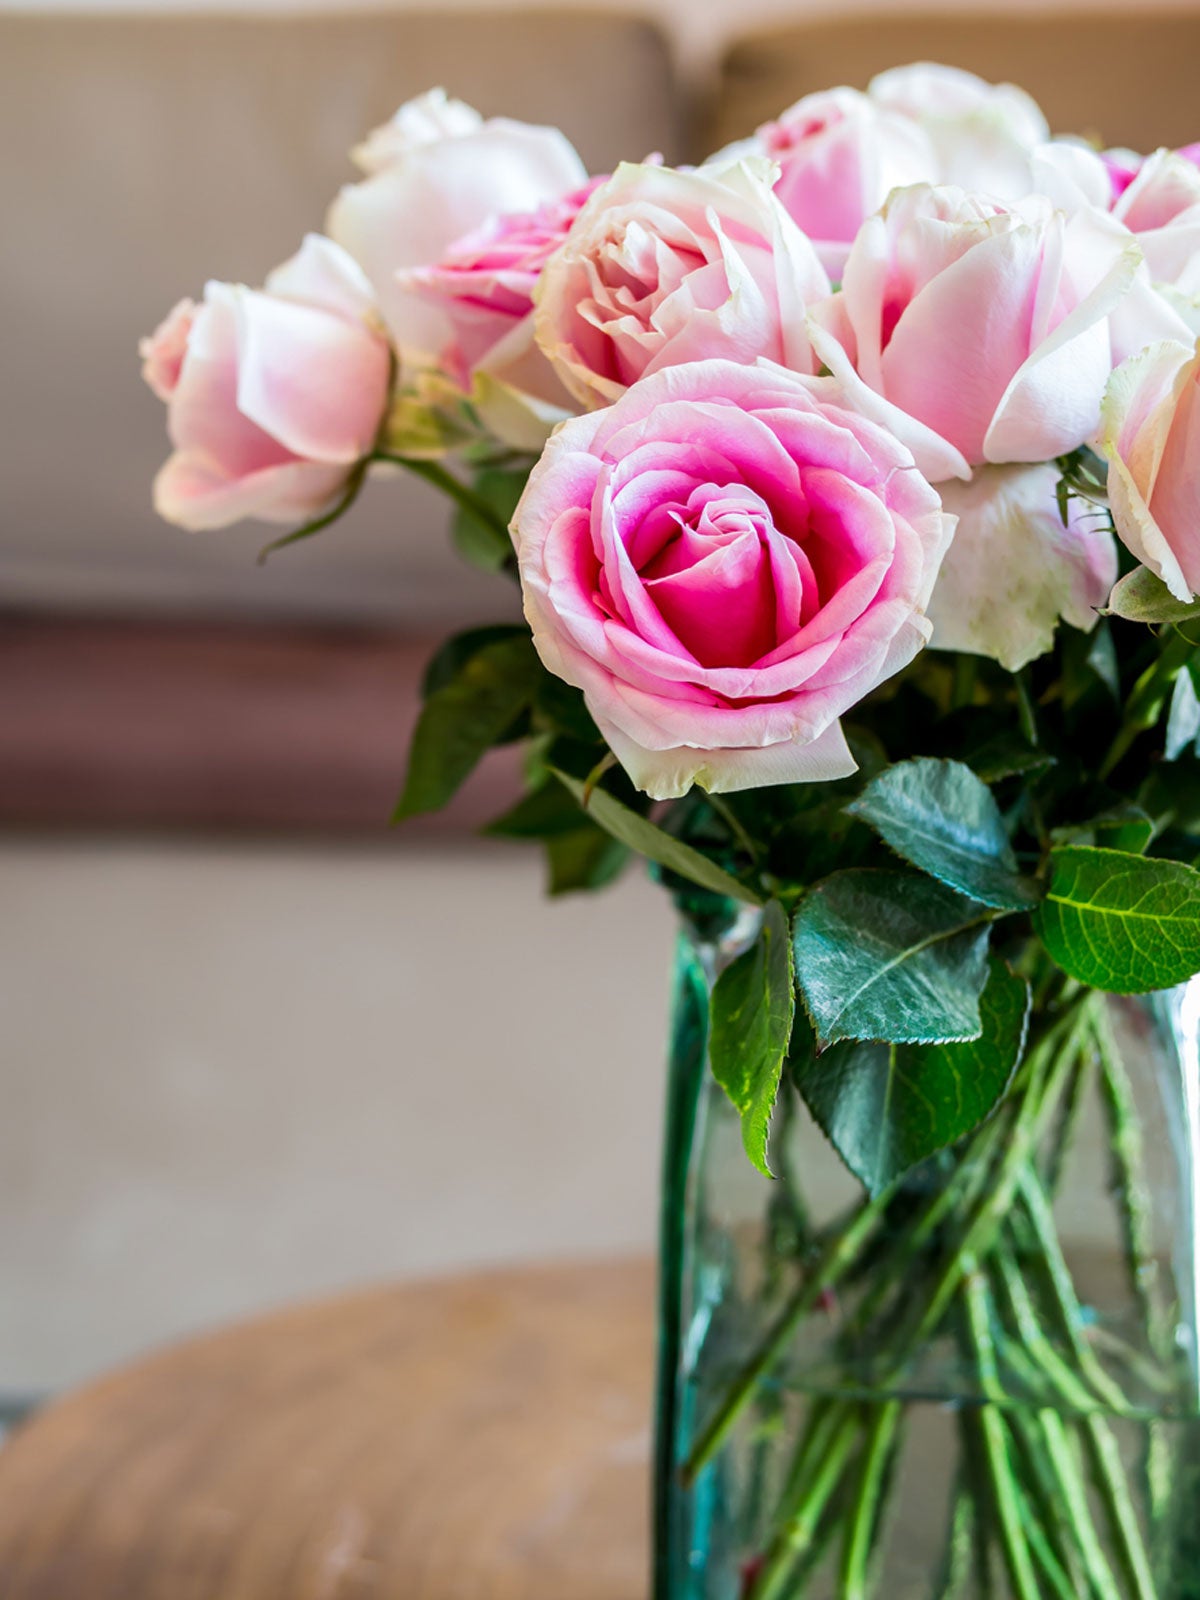 Does a rose stem in a bouquet work as a cutting to grow a rose plant? How  to do so what are the steps and how does it work for a novice? 